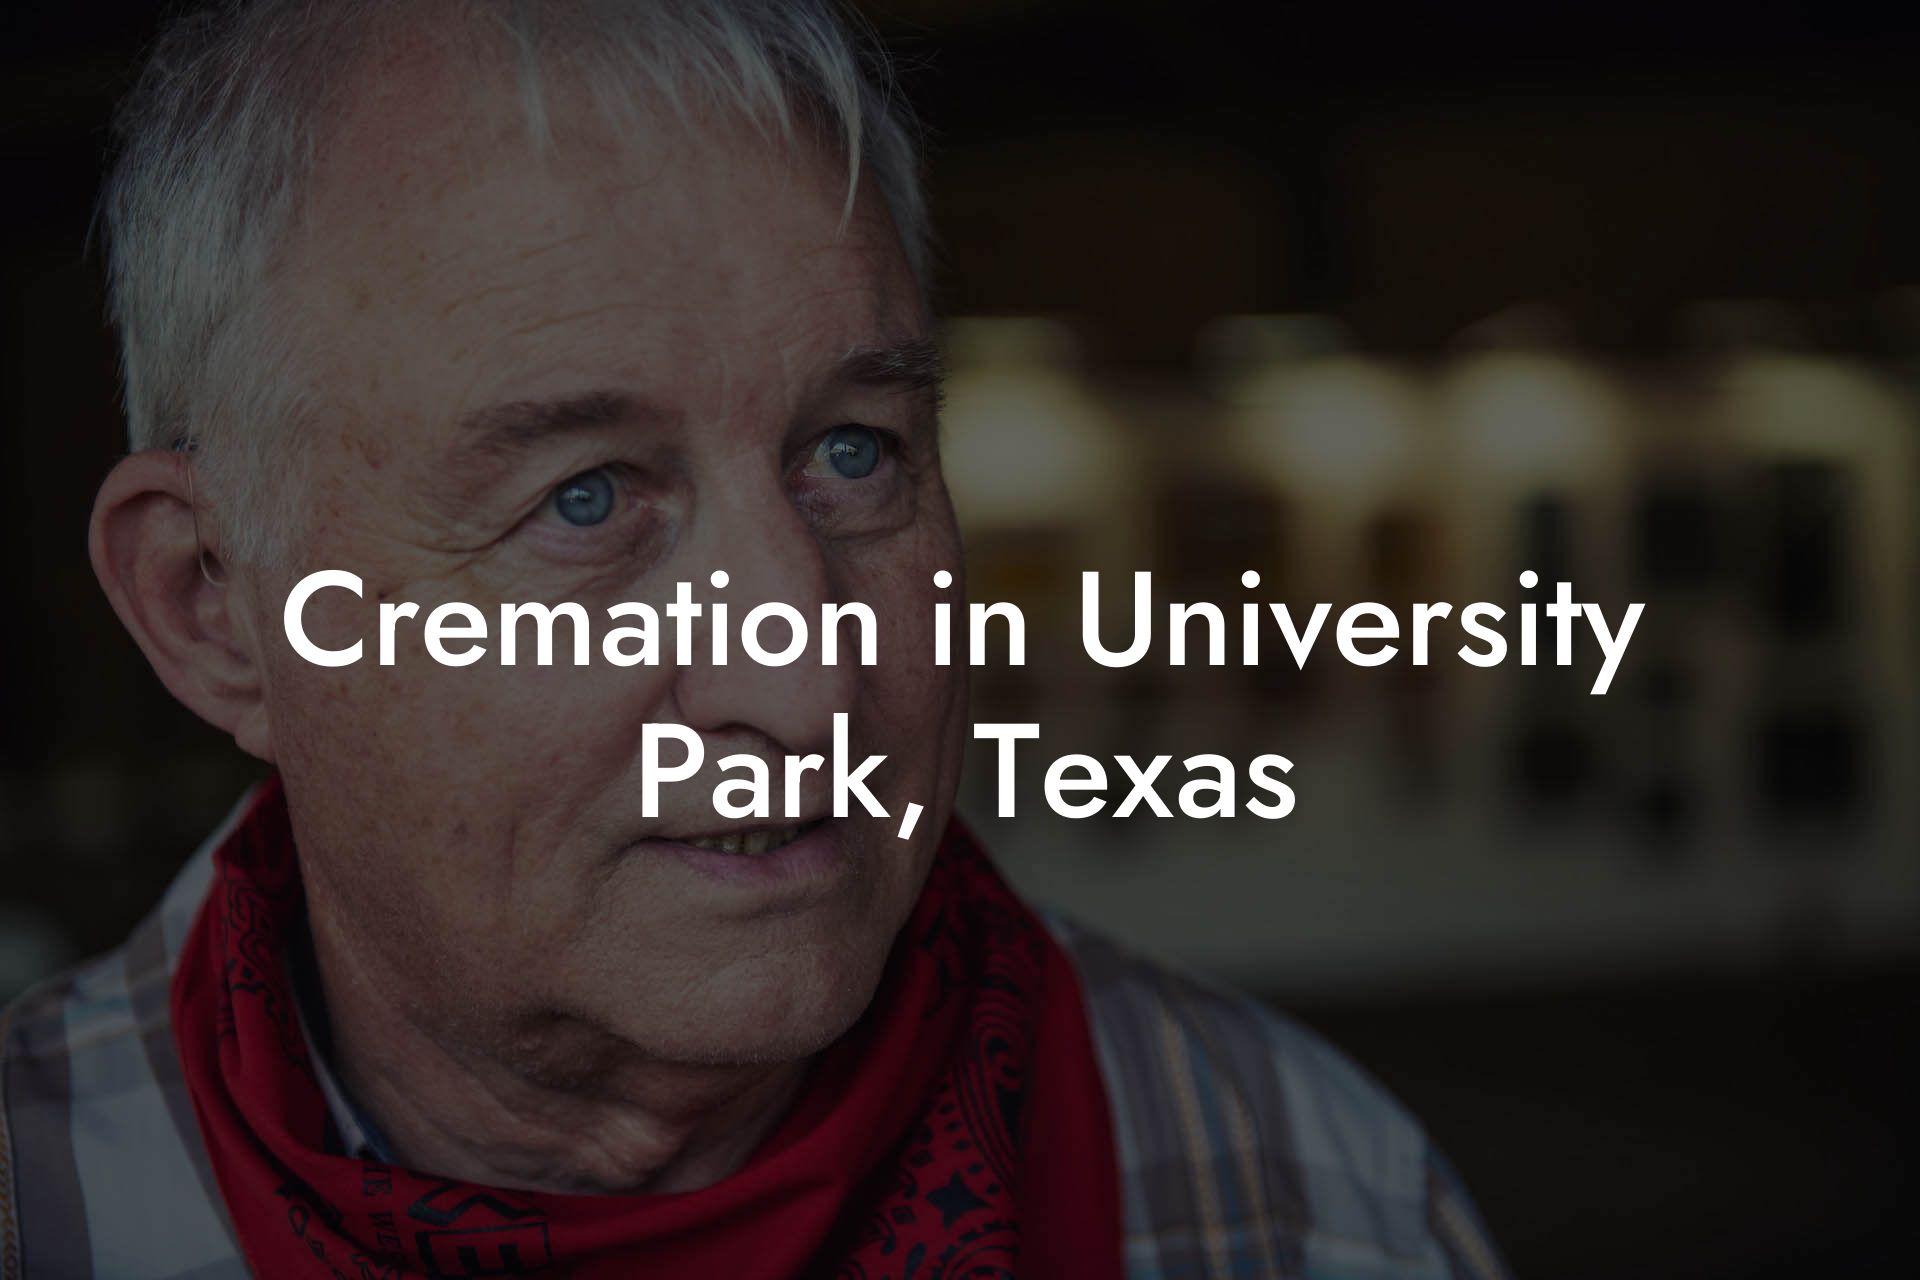 Cremation in University Park, Texas